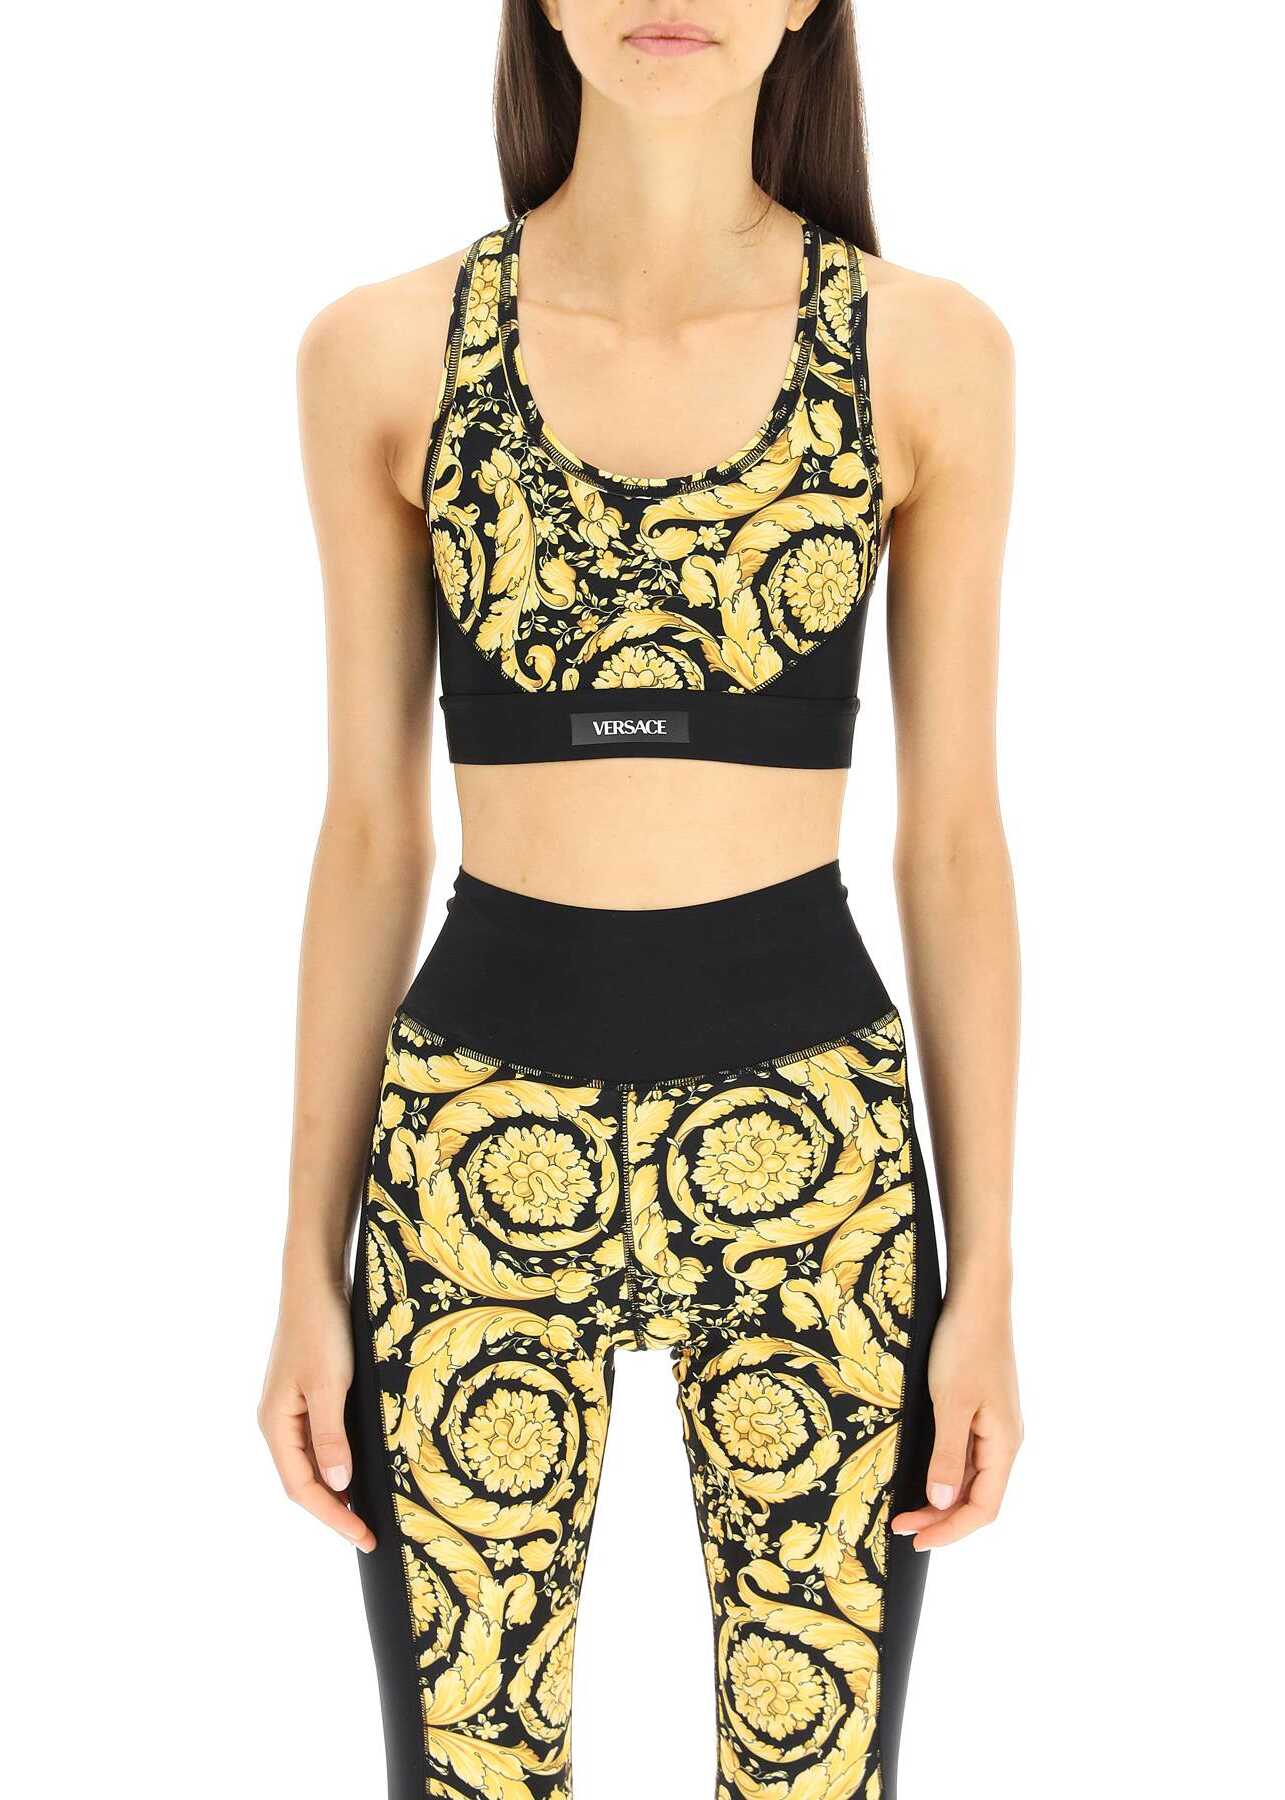 Versace Barocco Print Cropped Sports Top NERO STAMPA